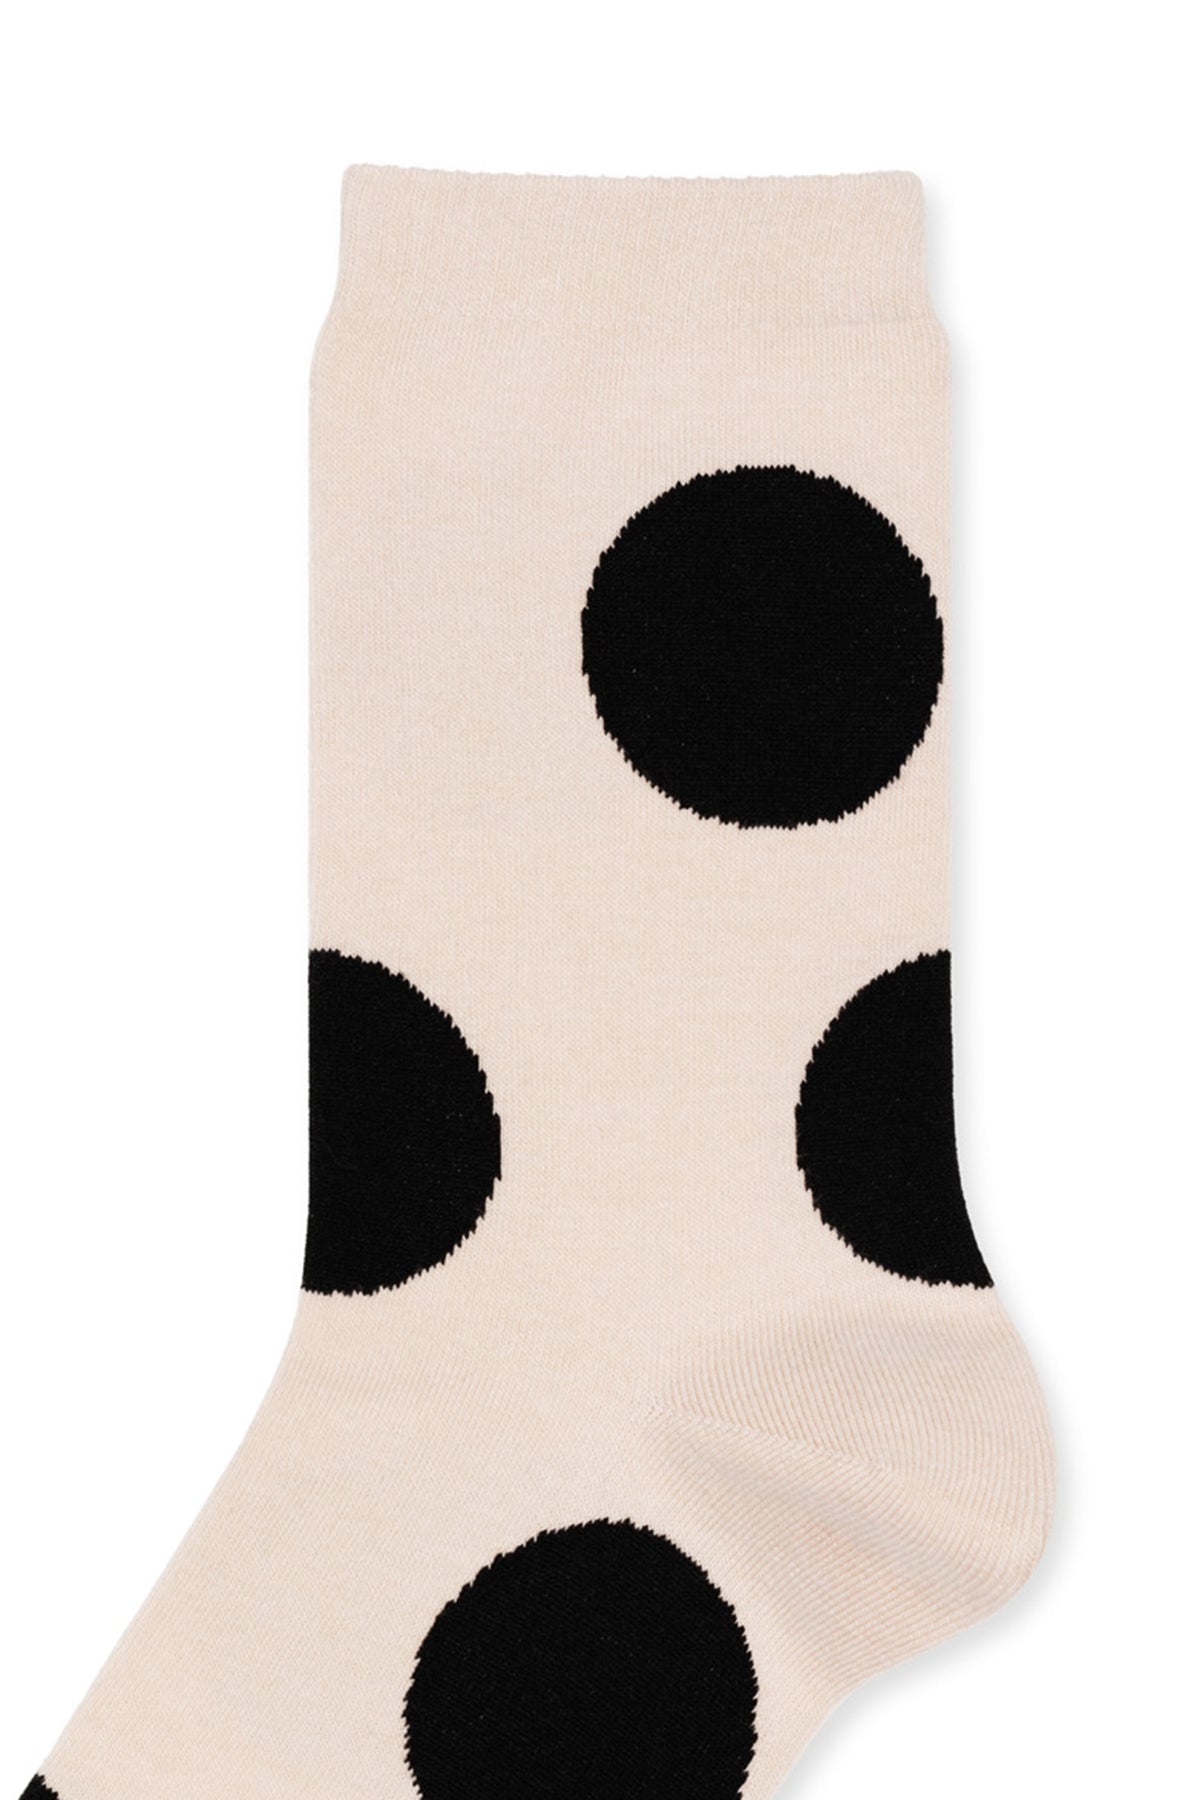   RIE CREW SOCK BY HANSEL FROM BASEL 